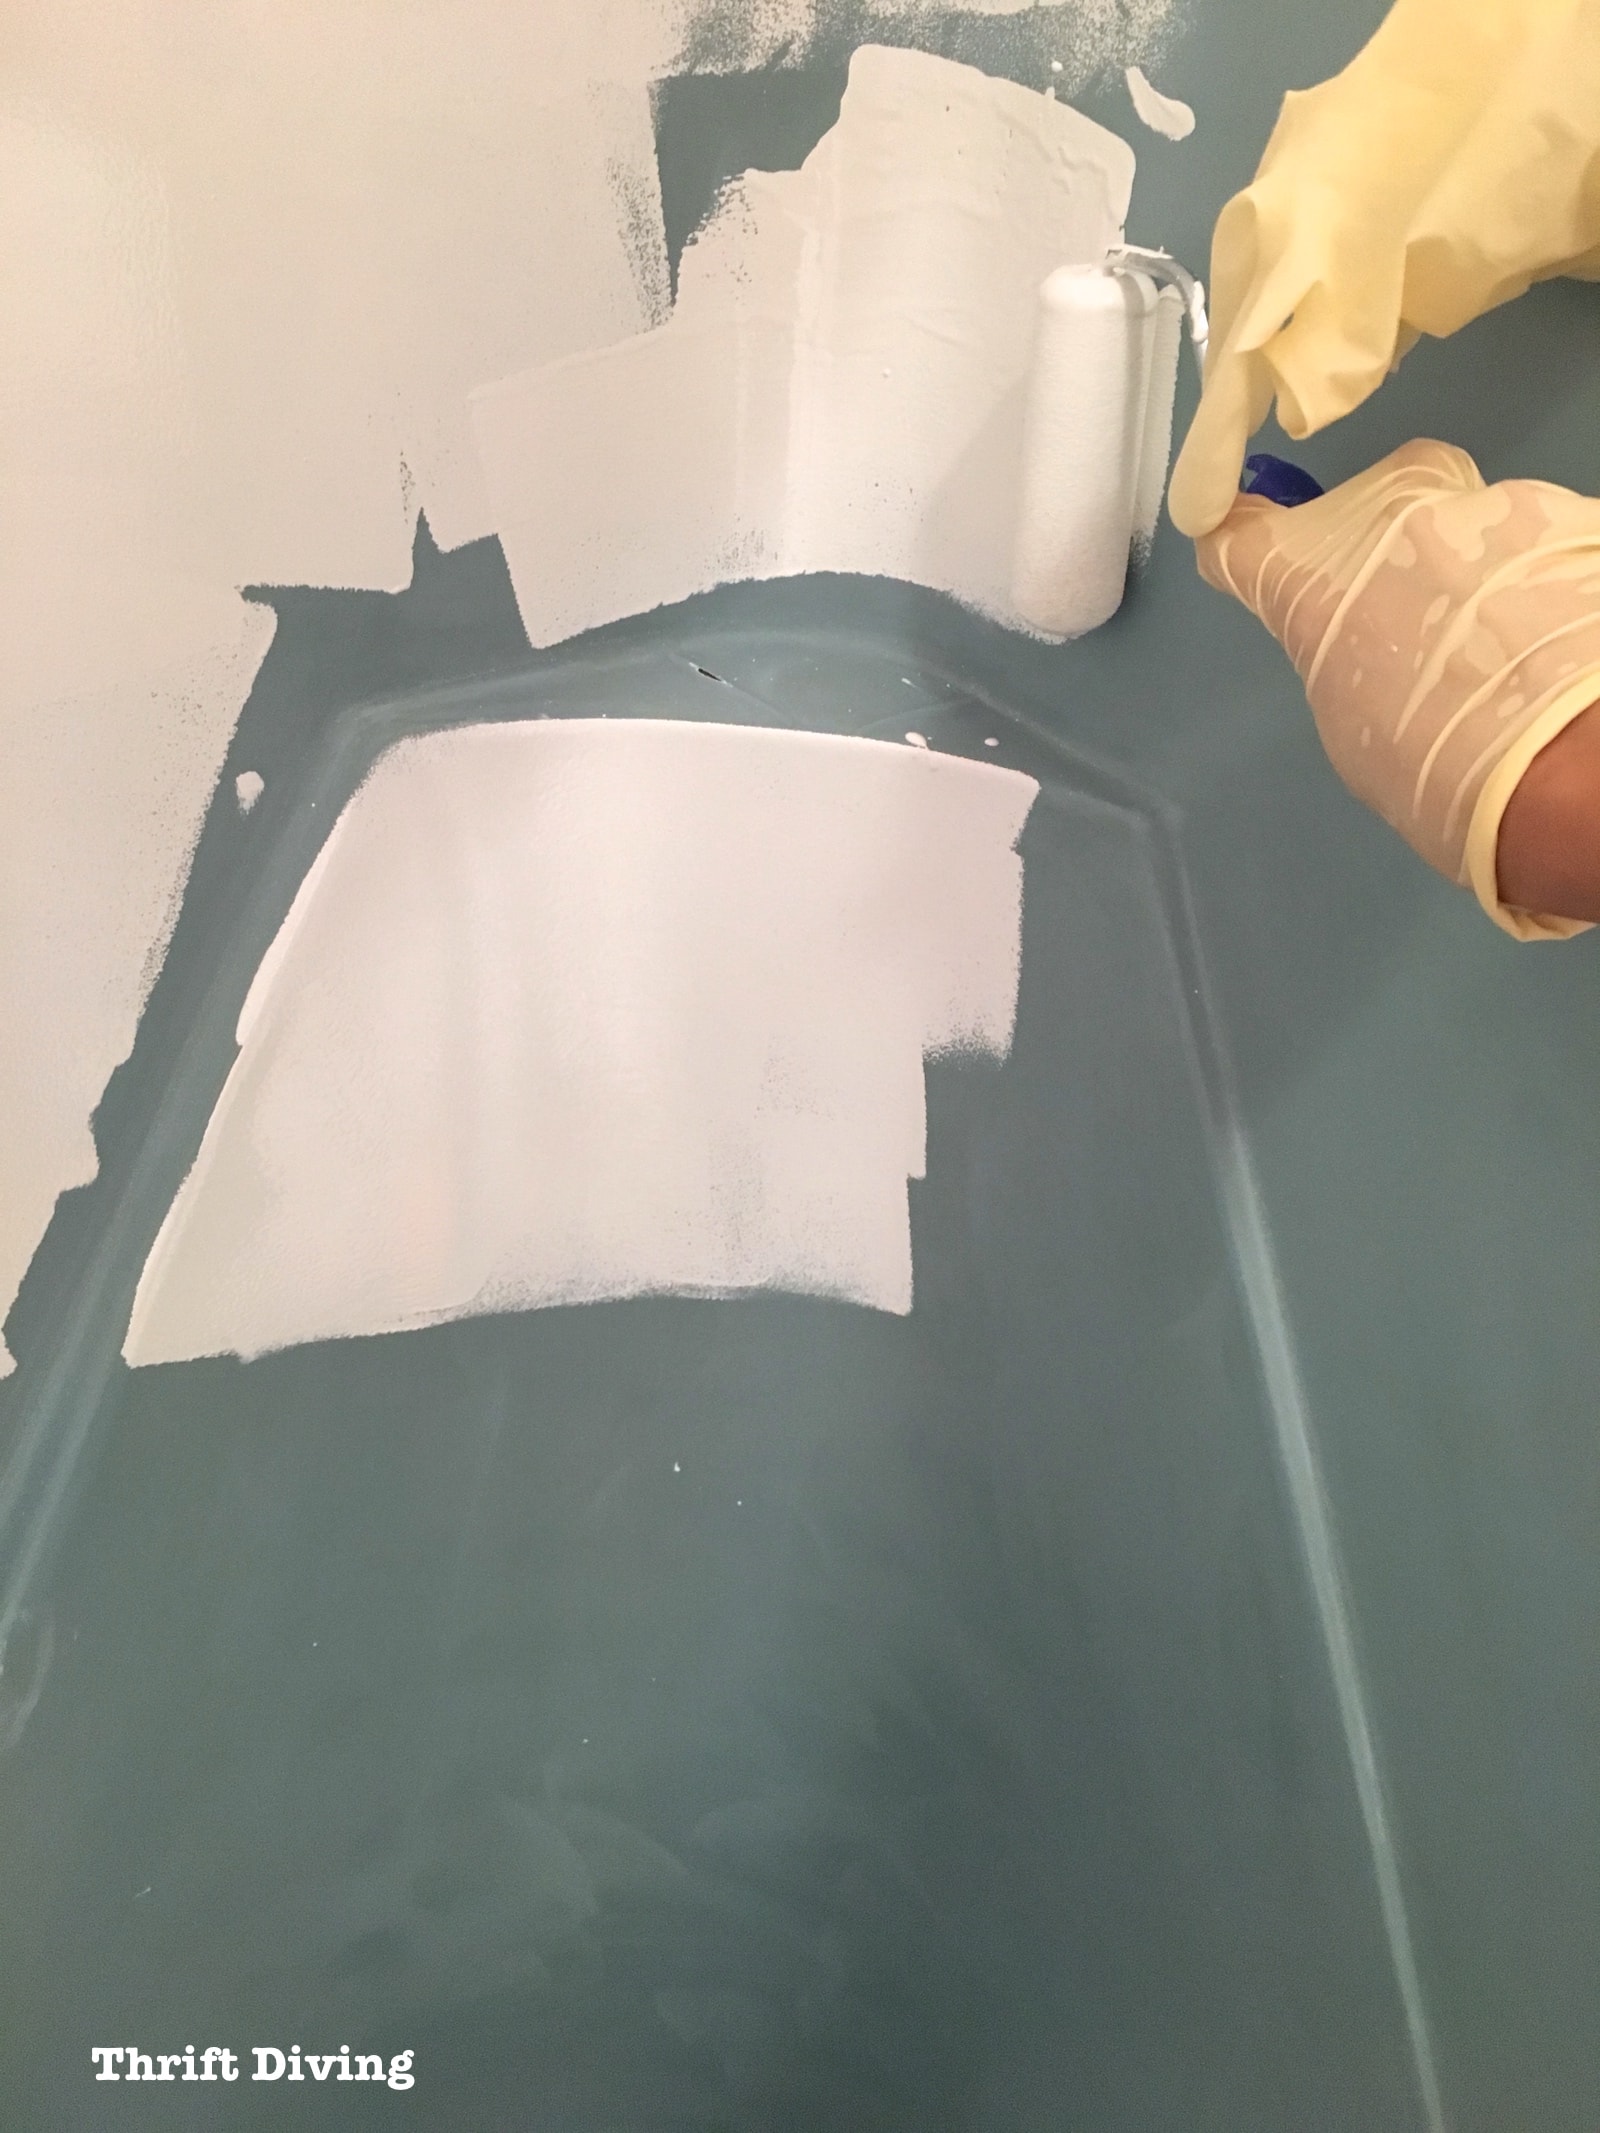 Shower-and-tub-refinishing-how-to-paint-a-shower-tub - Thrift Diving Blog - 1810